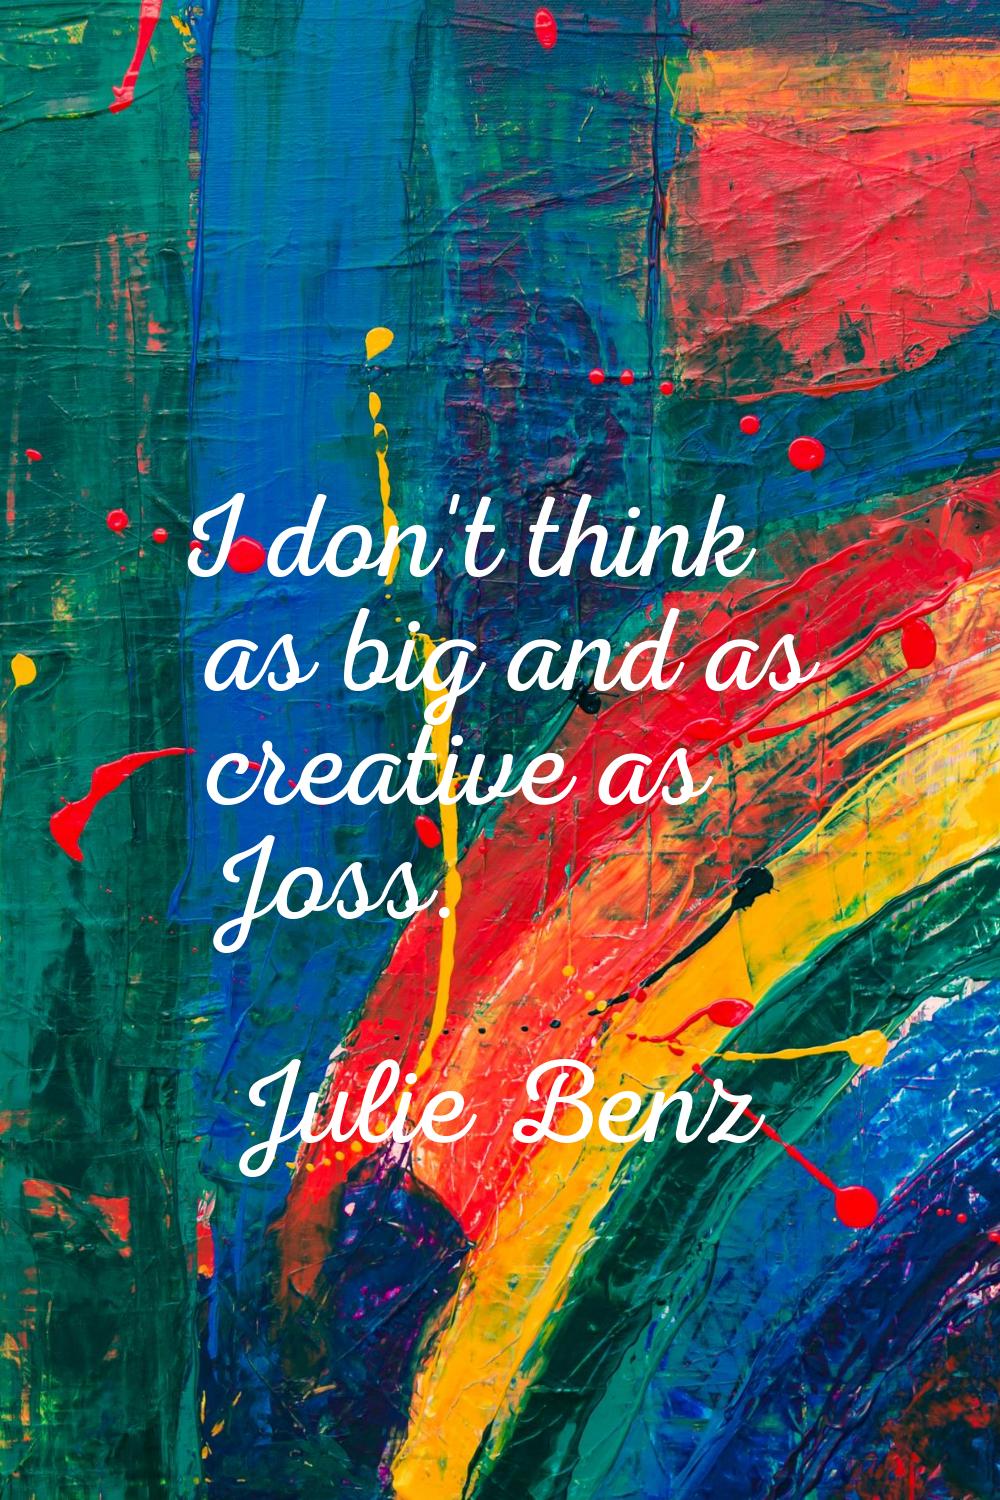 I don't think as big and as creative as Joss.